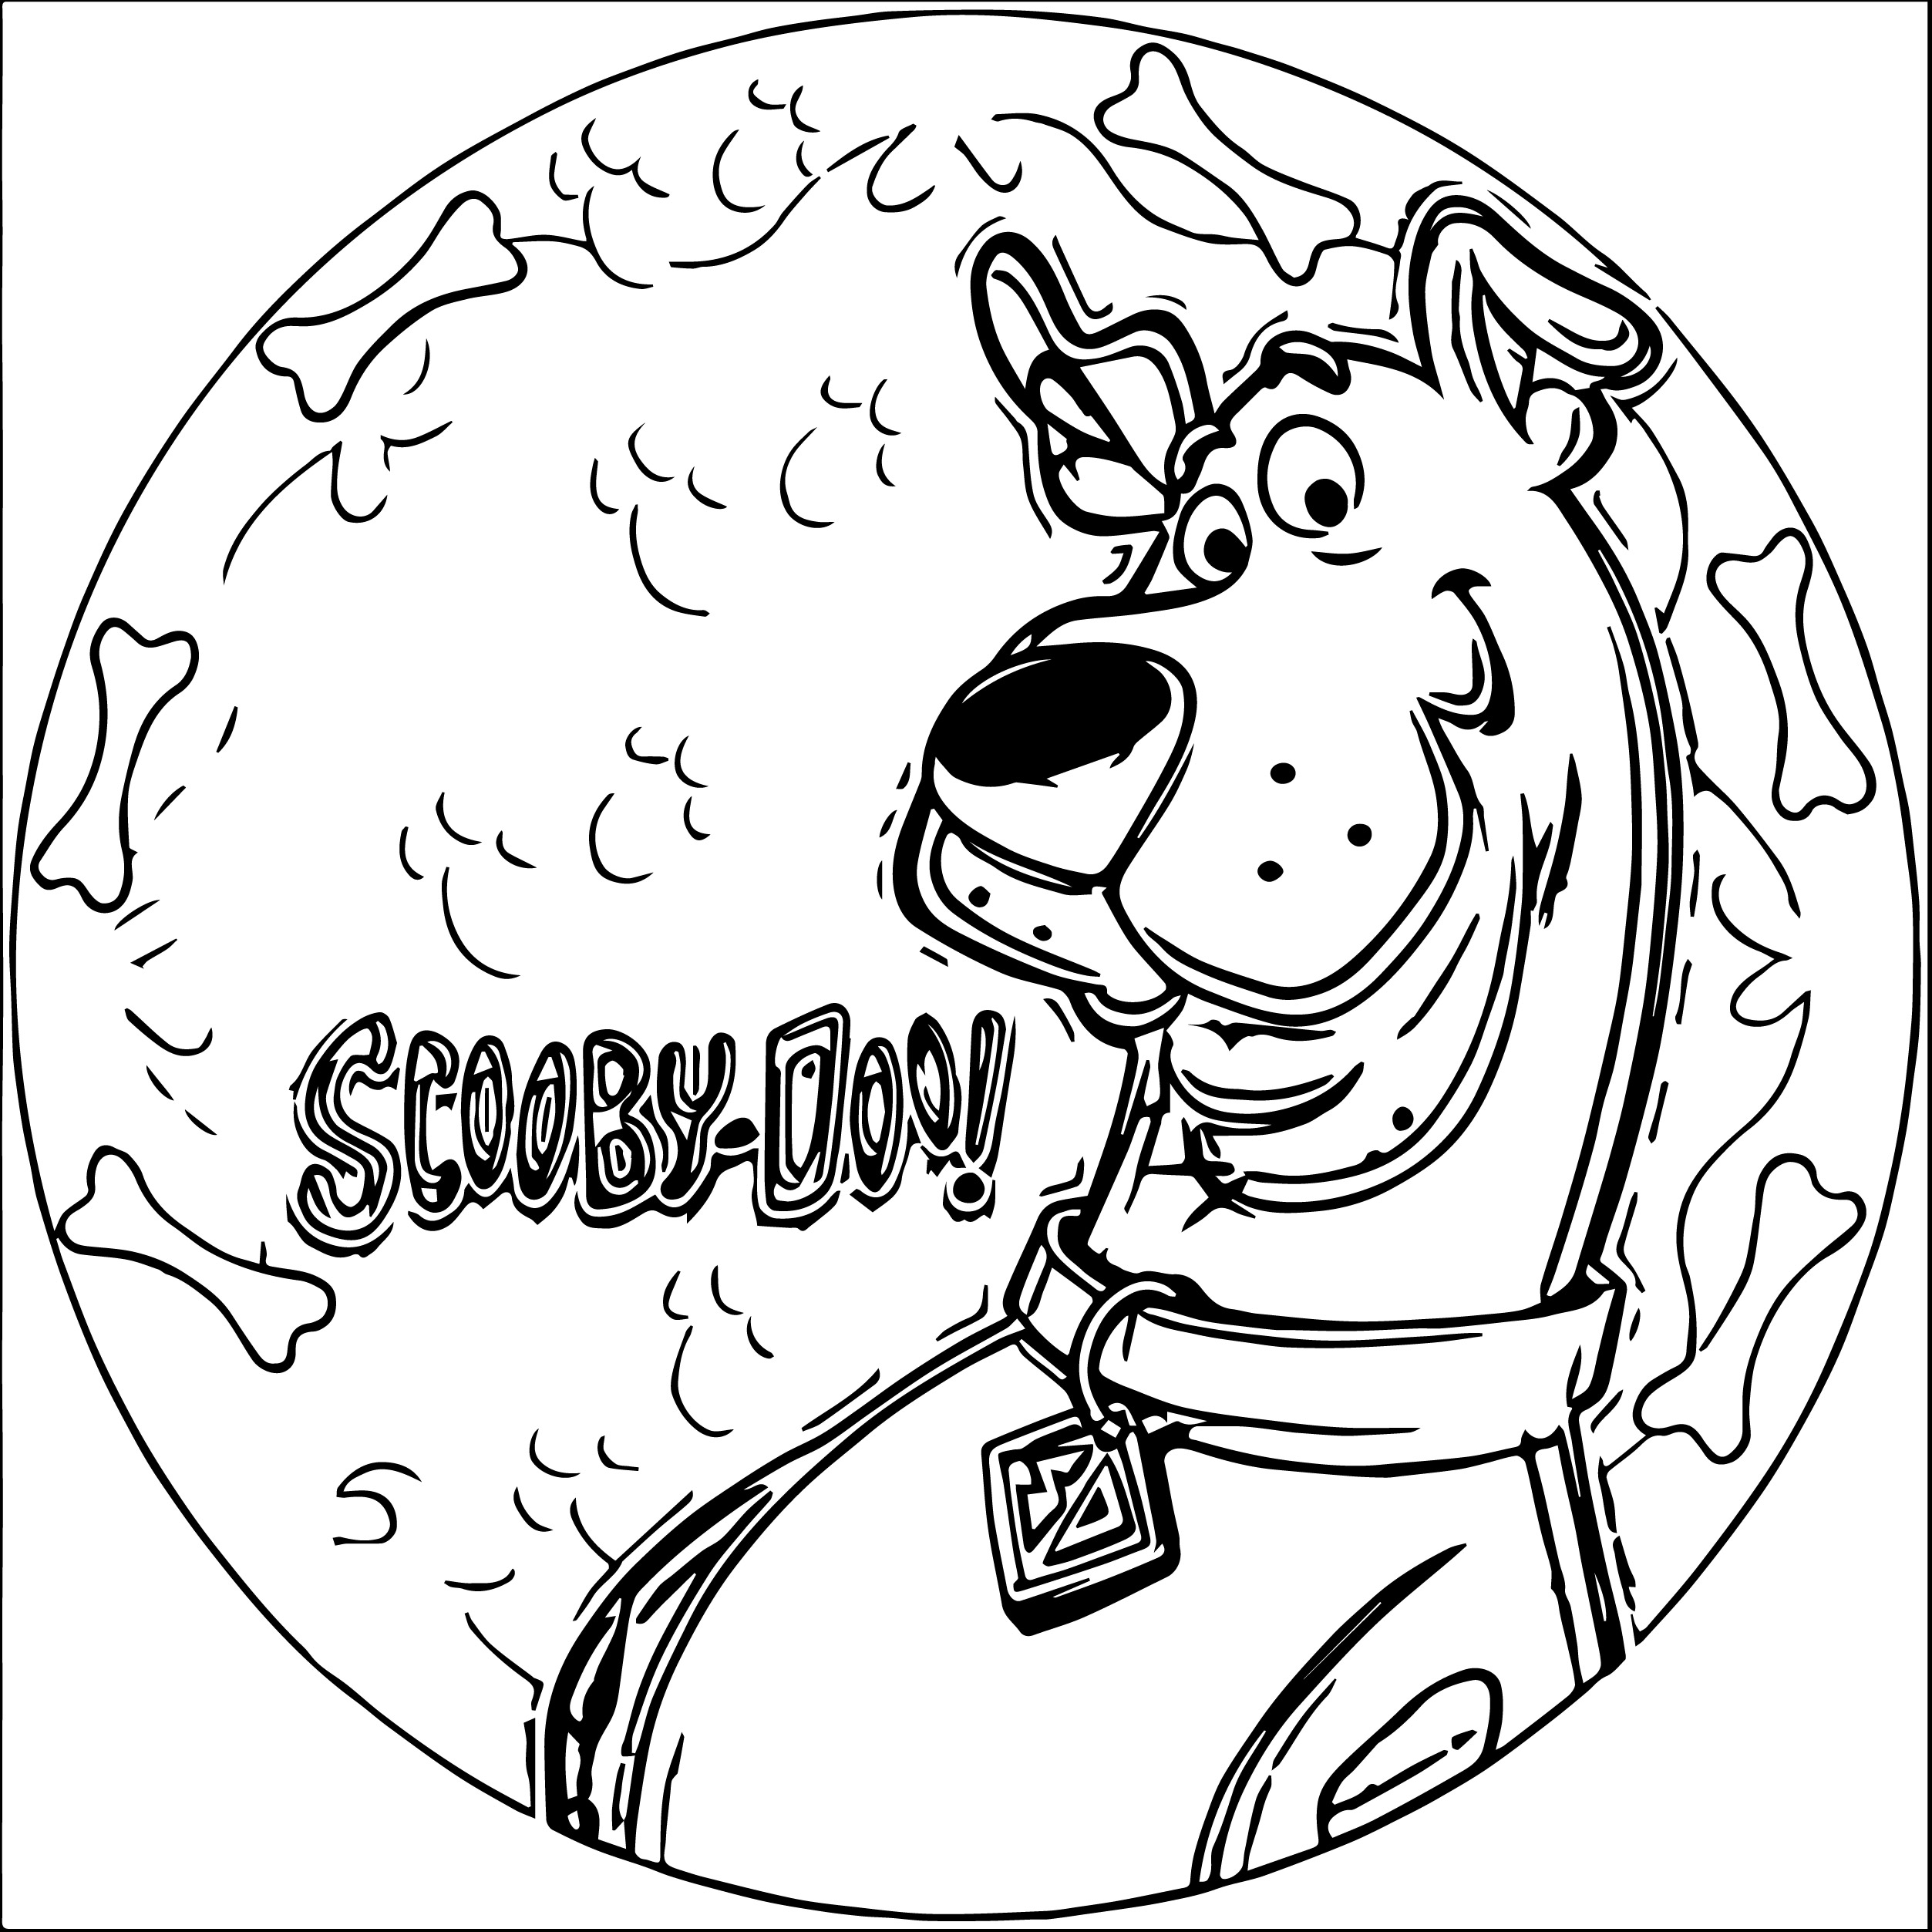 Scooby Doo Drawing Pictures at GetDrawings Free download